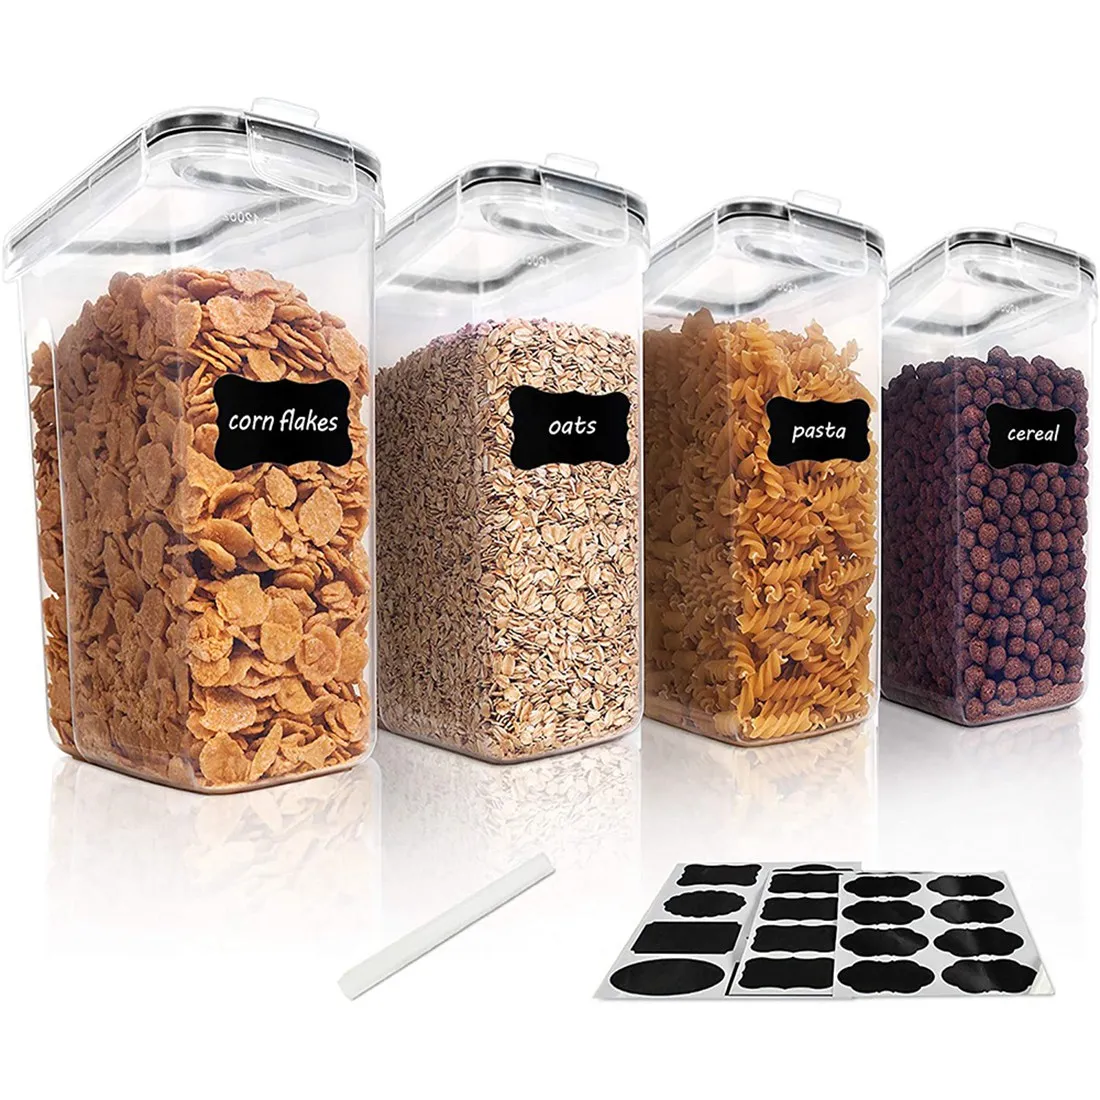 

4Pcs Cereal Storage Container Set PP Airtight Food Storage Containers 4L for Cereal Snacks and Sugar